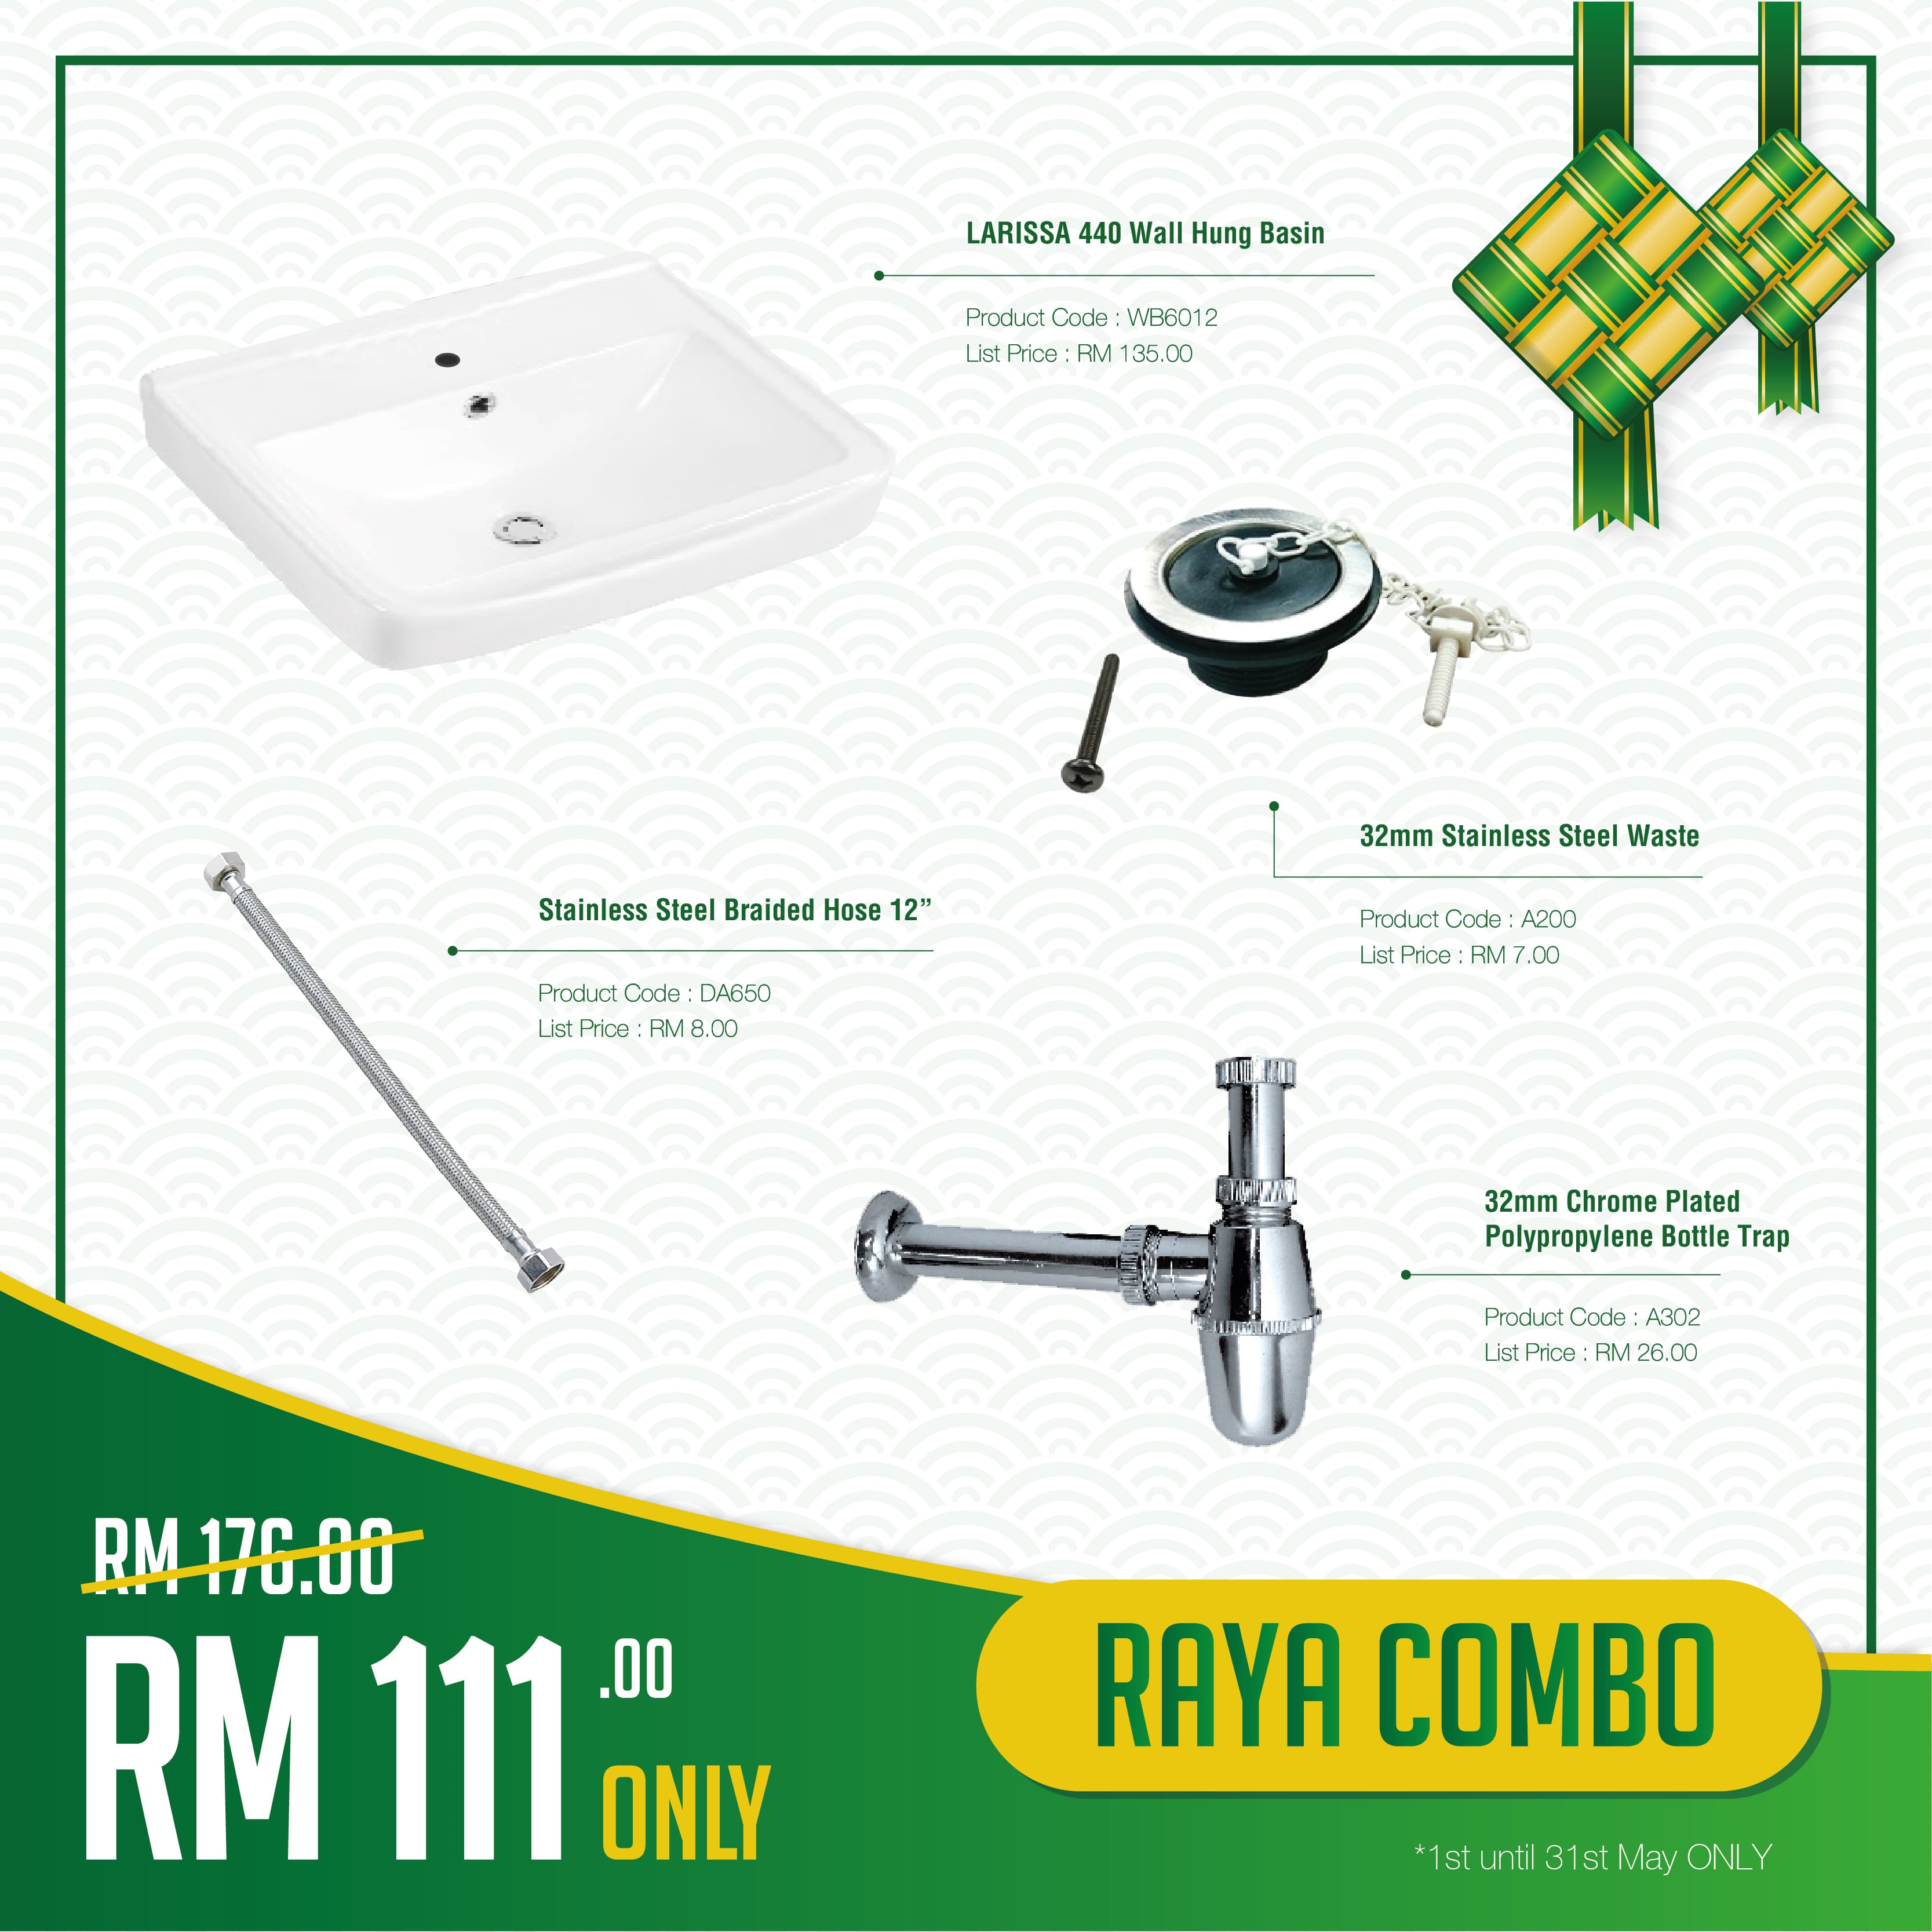 RAYA COMBO PROMOTION Larissa Wall Hung Basin + Braided Hose 12 Inch + Stainless Steel Waste + Chrome